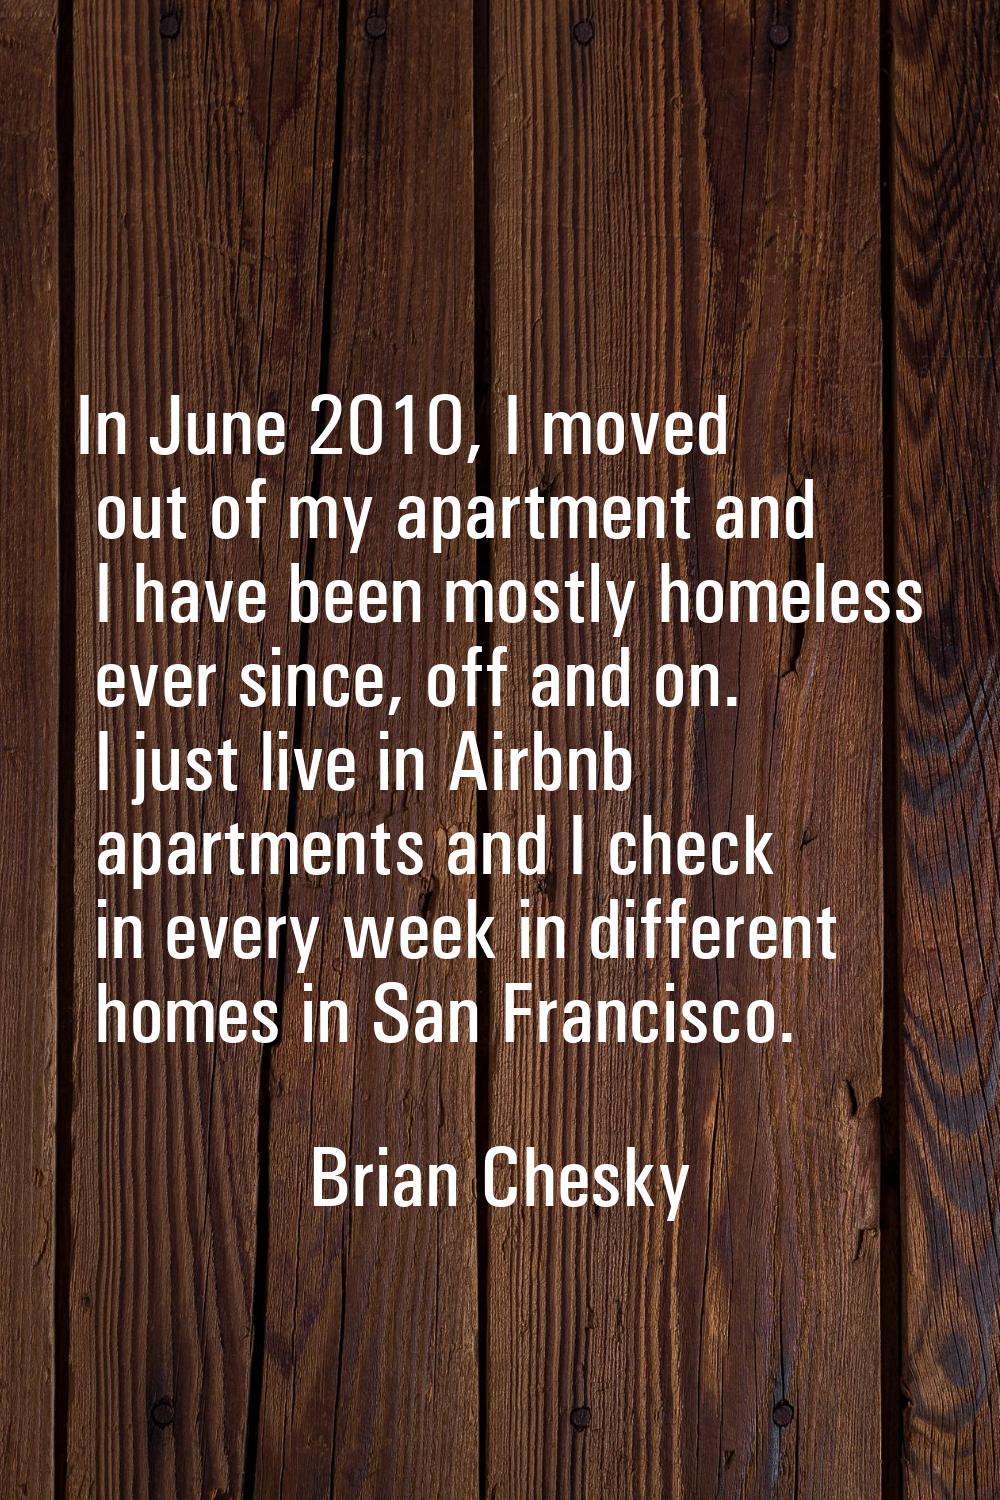 In June 2010, I moved out of my apartment and I have been mostly homeless ever since, off and on. I